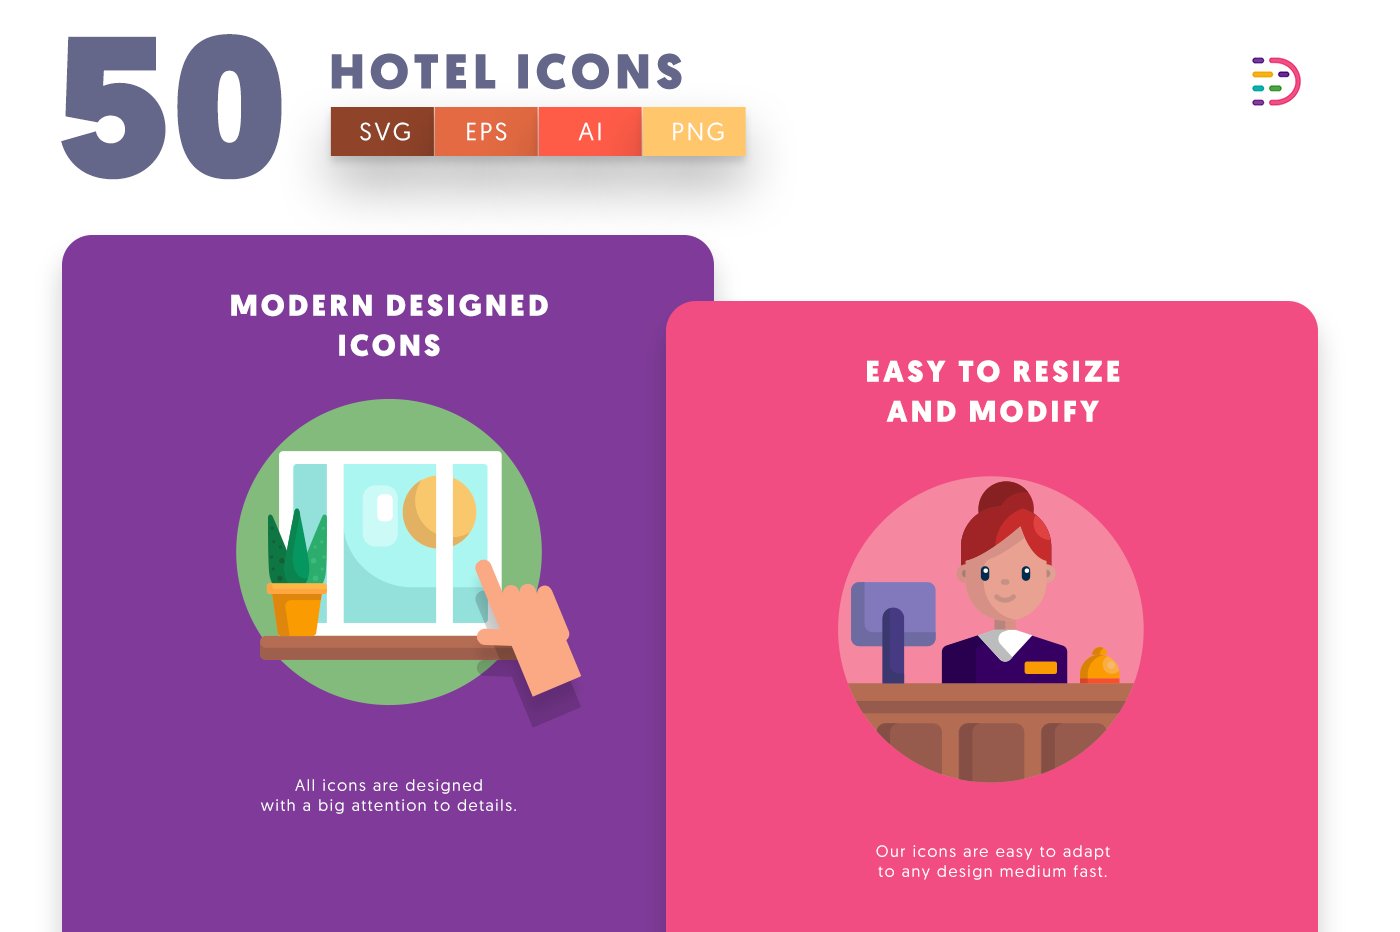 hotel icons cover copy 5 919